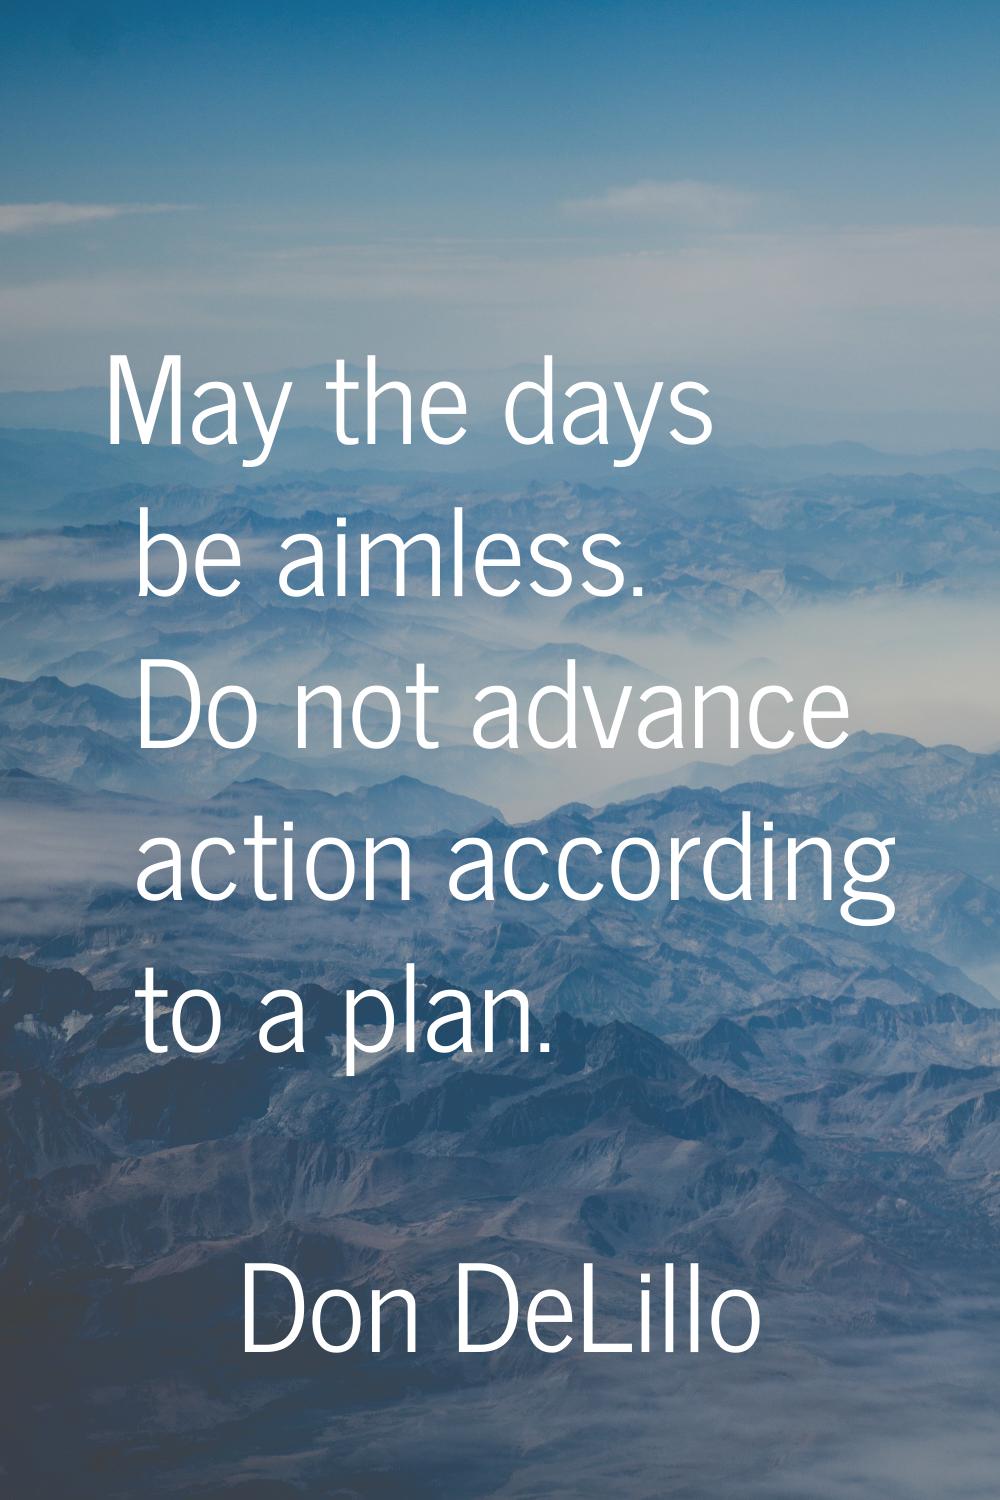 May the days be aimless. Do not advance action according to a plan.